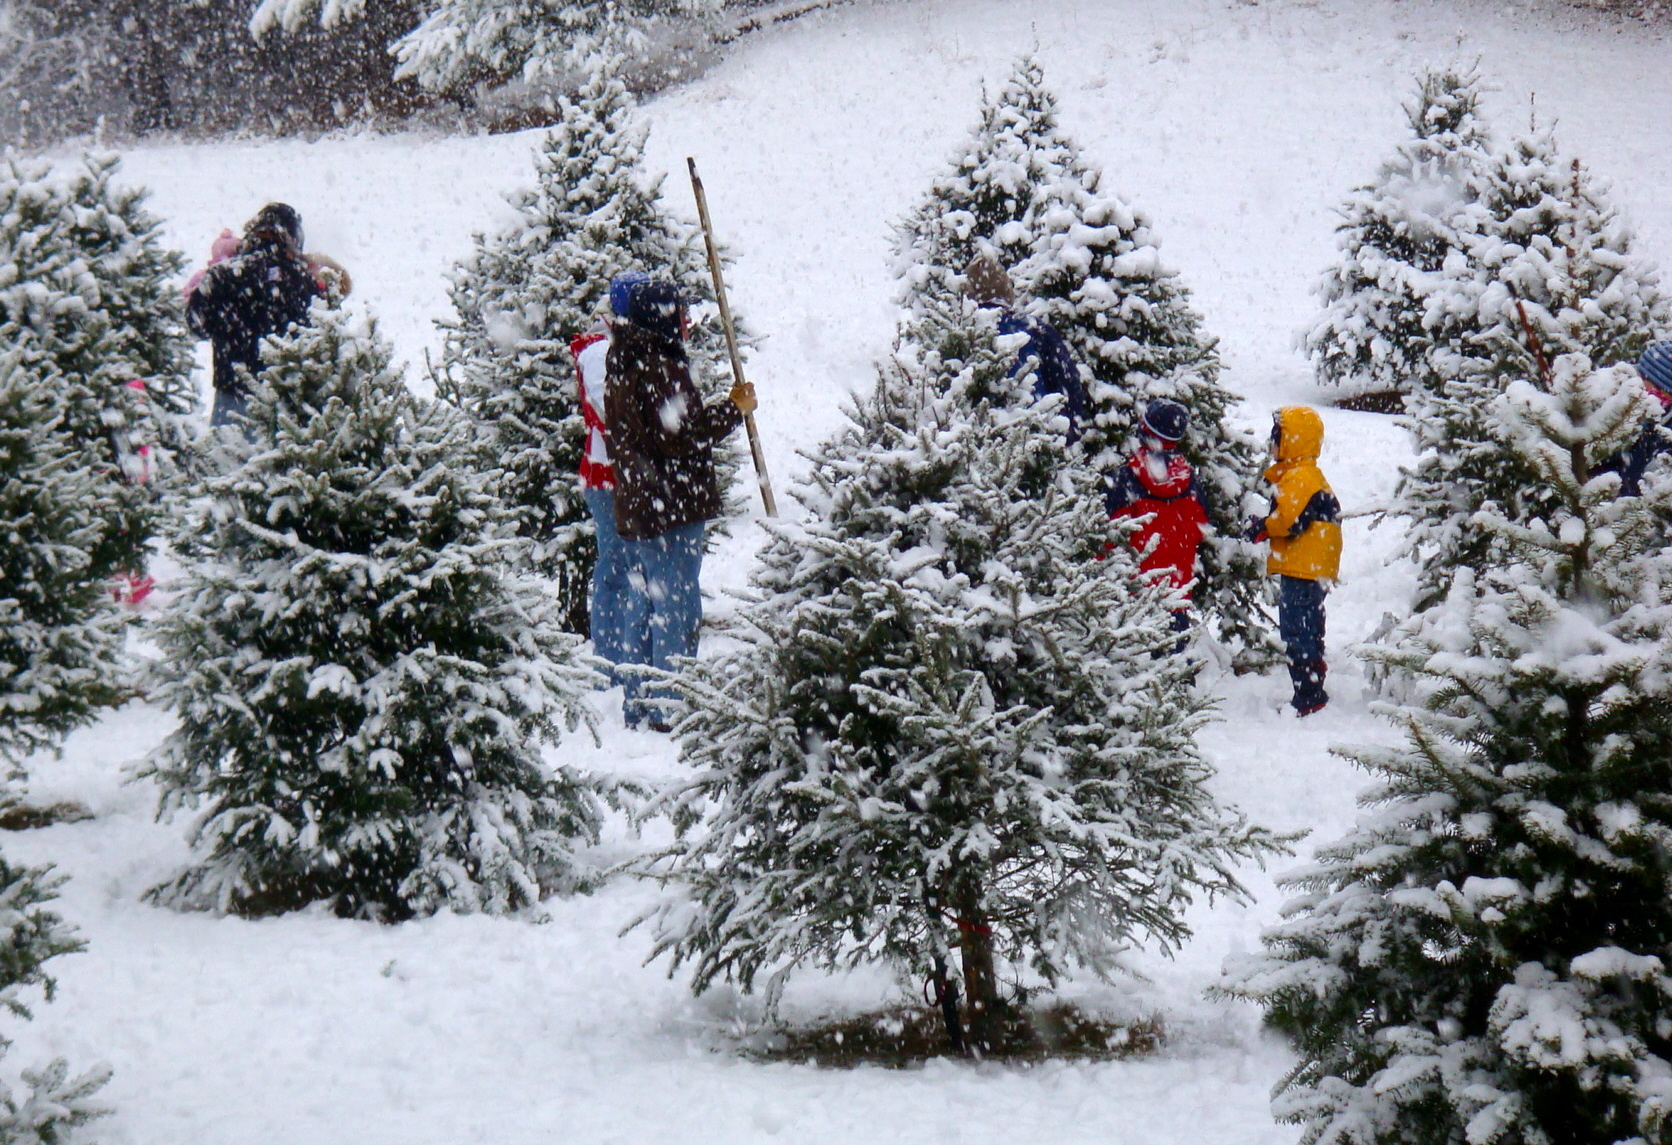 Places to Cut Your Own Christmas Tree in Massachusetts: Christmas Tree Farms in Massachusetts